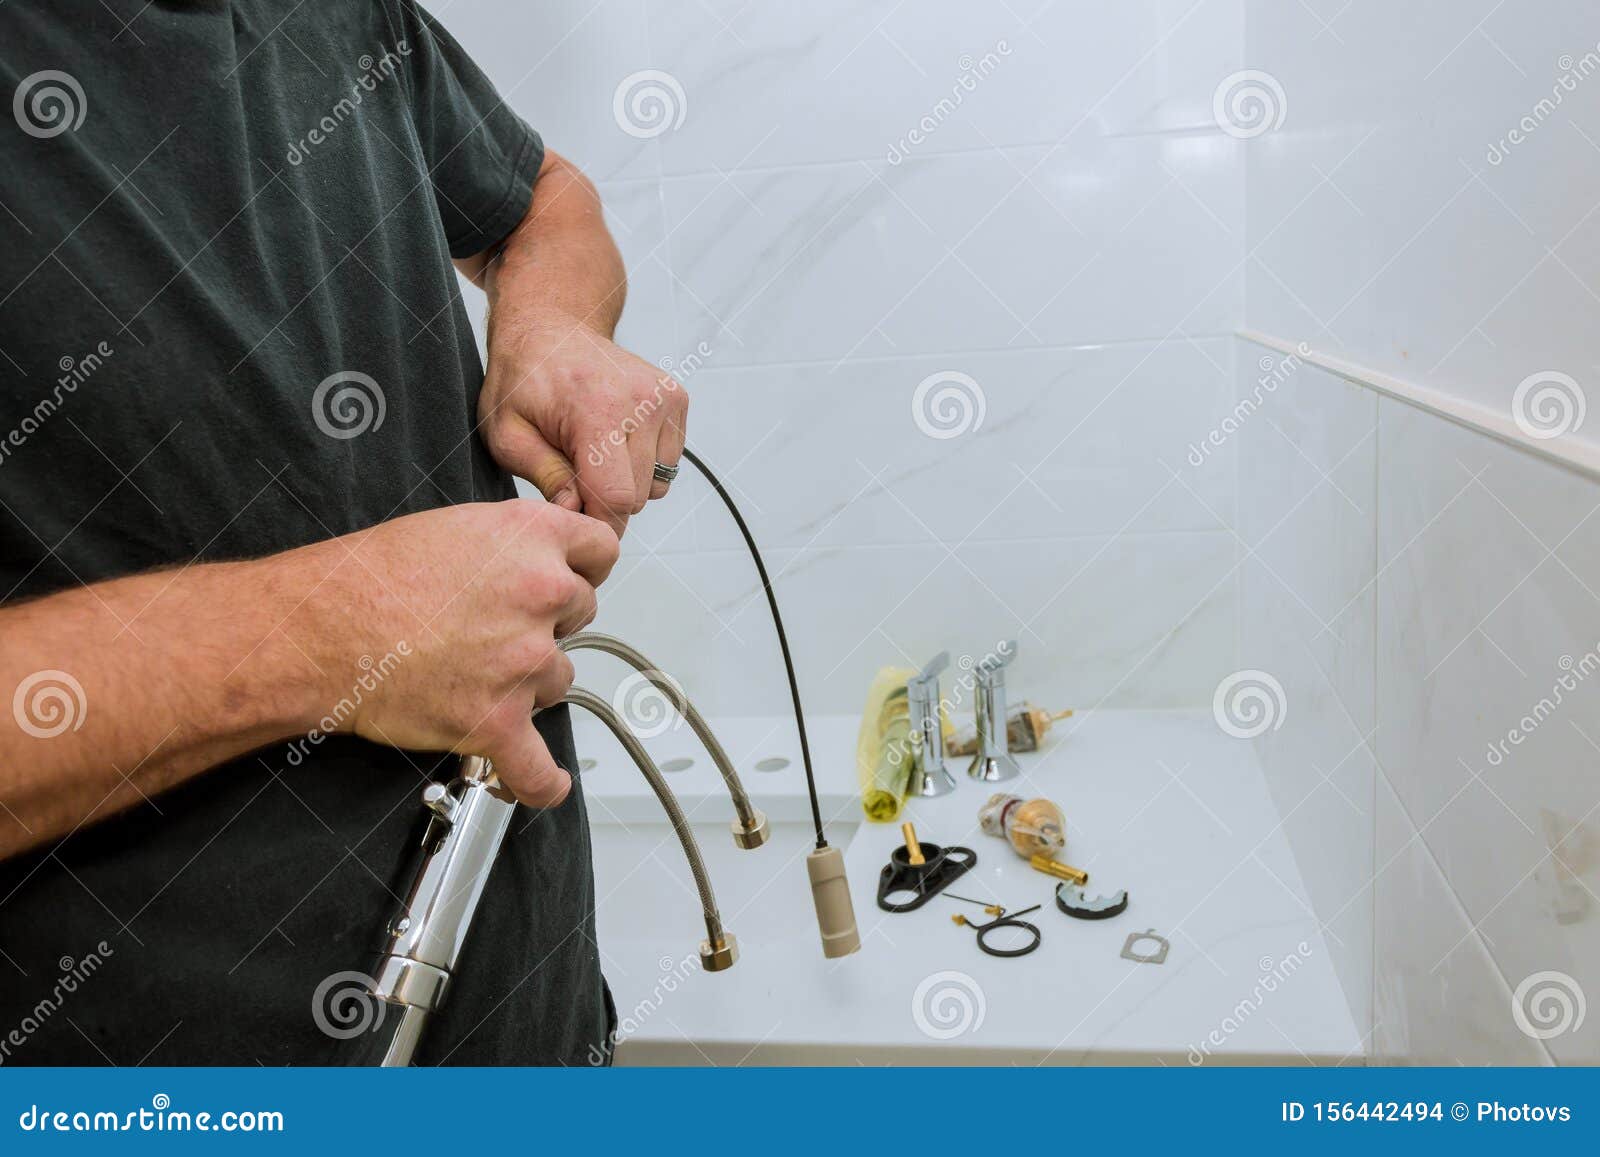 Plumber Installing A Faucet In A Bathroom Only Hands To Assemble